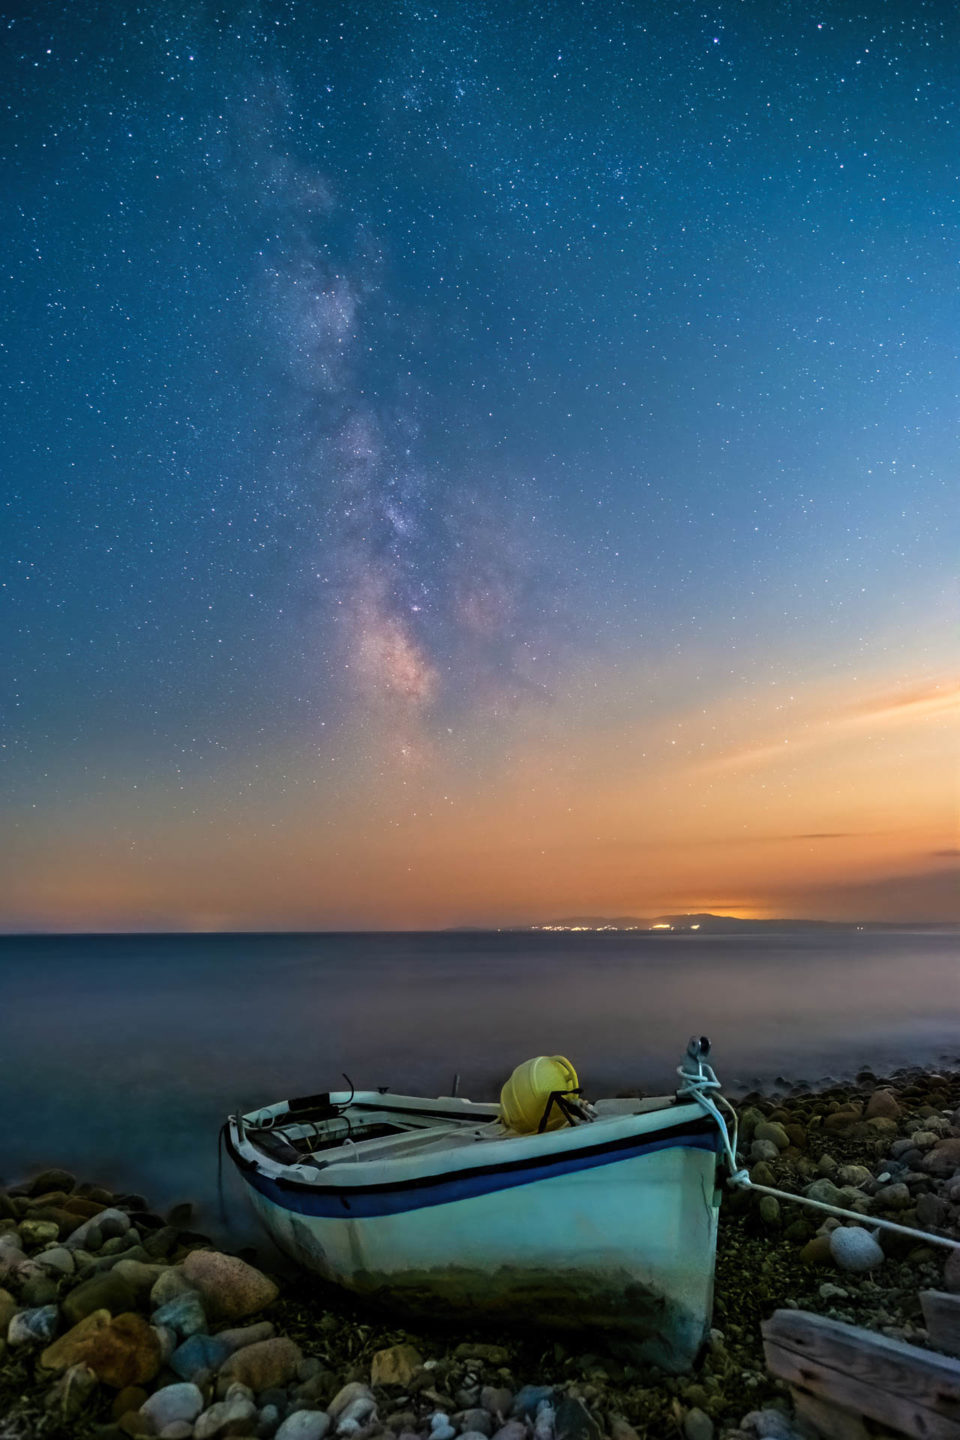 A fishing boat under the milky way